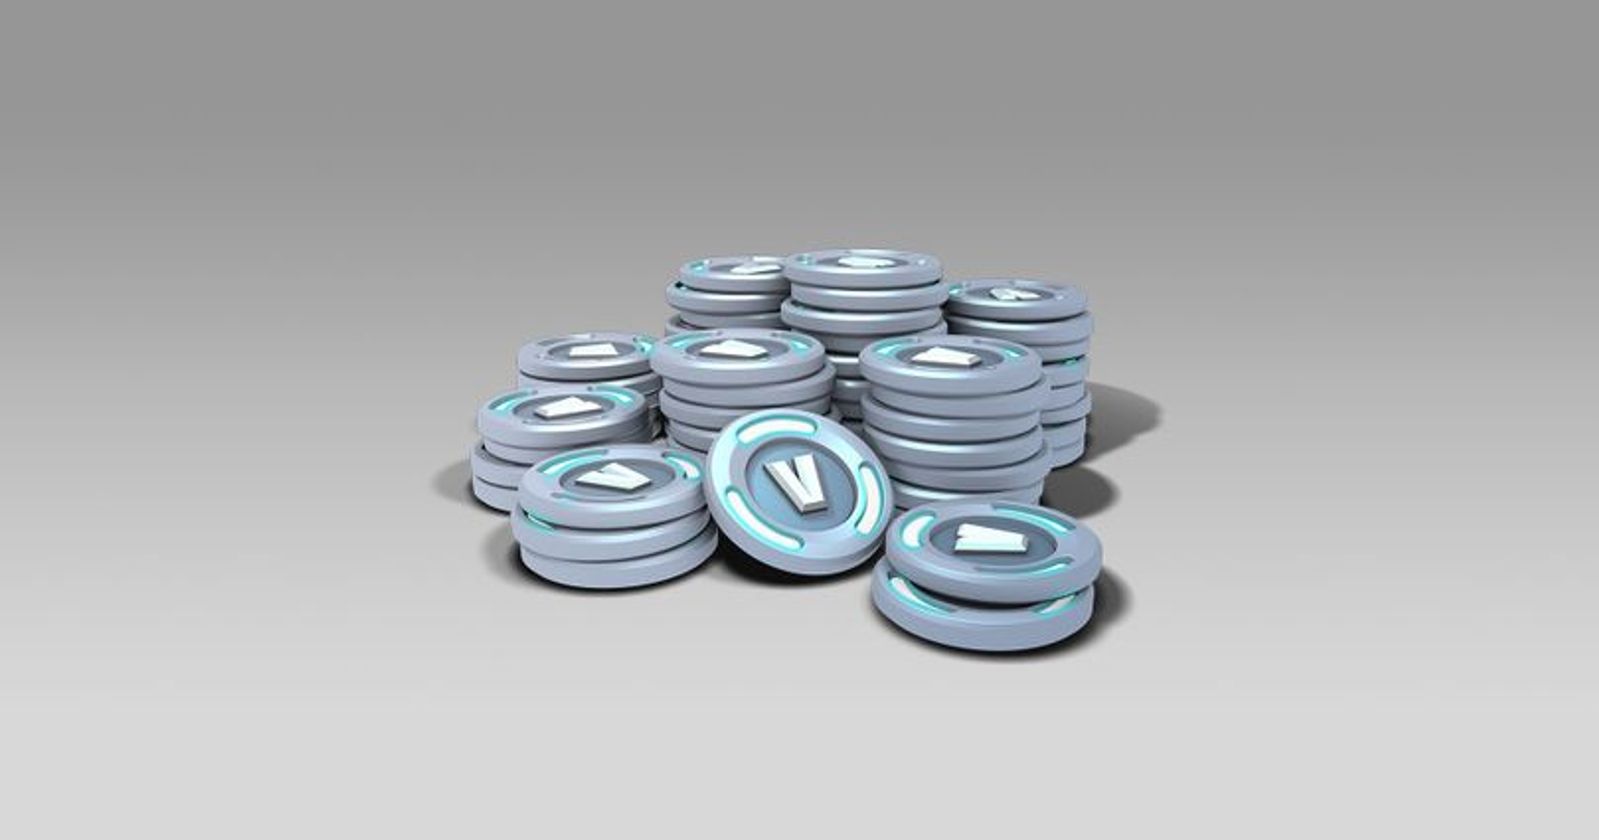 How Much Are V-Bucks? - prices, packs, and more